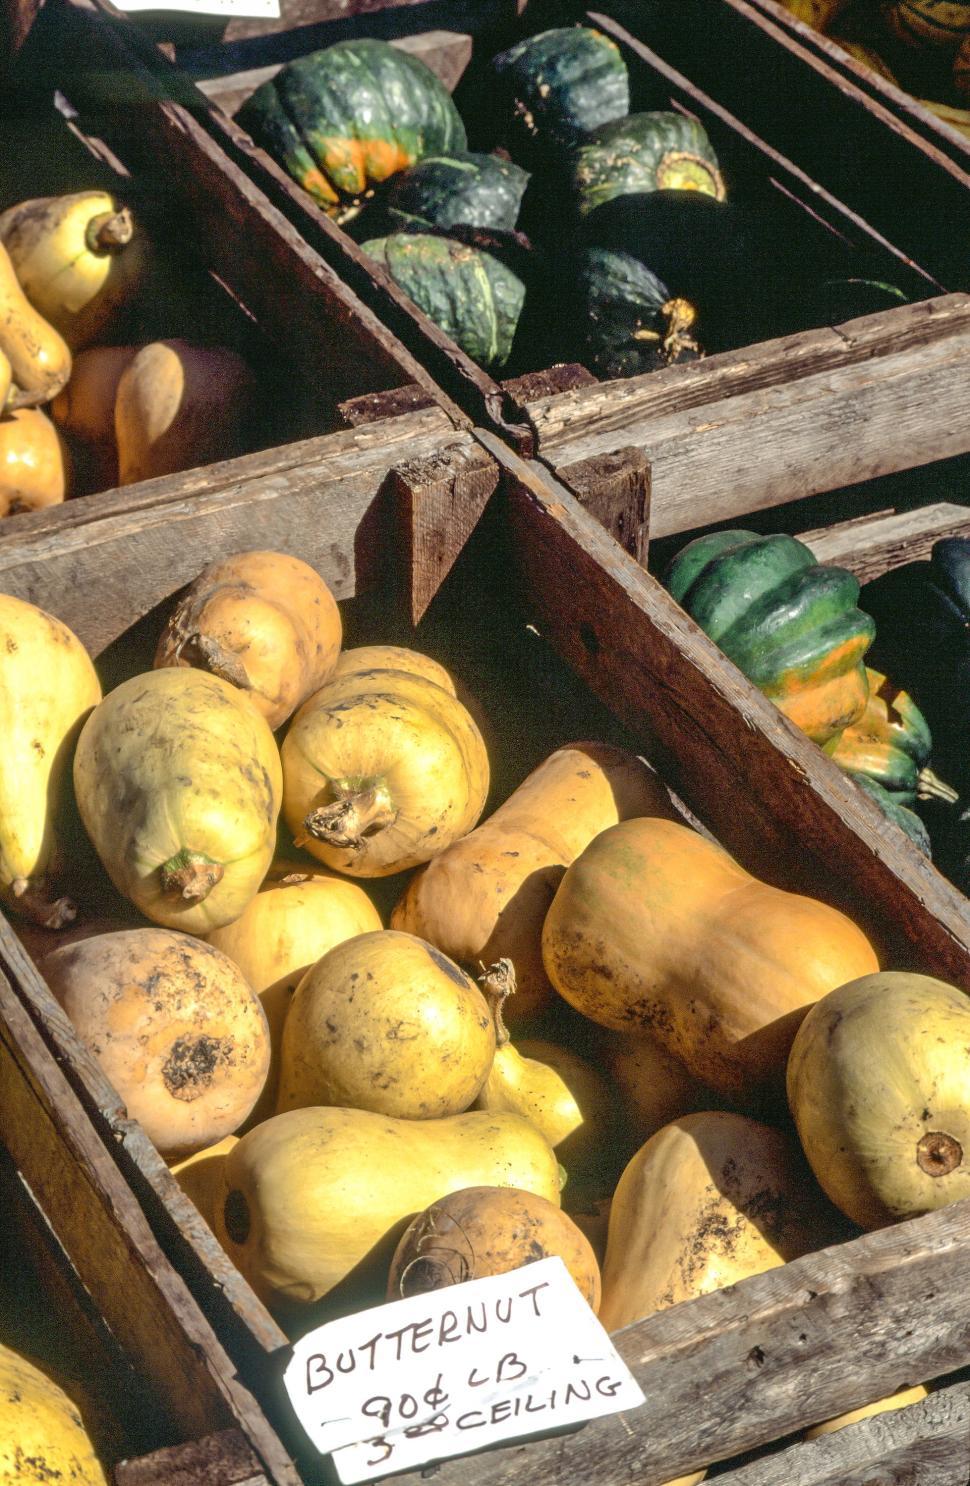 Free Image of Butternut squash for sale 